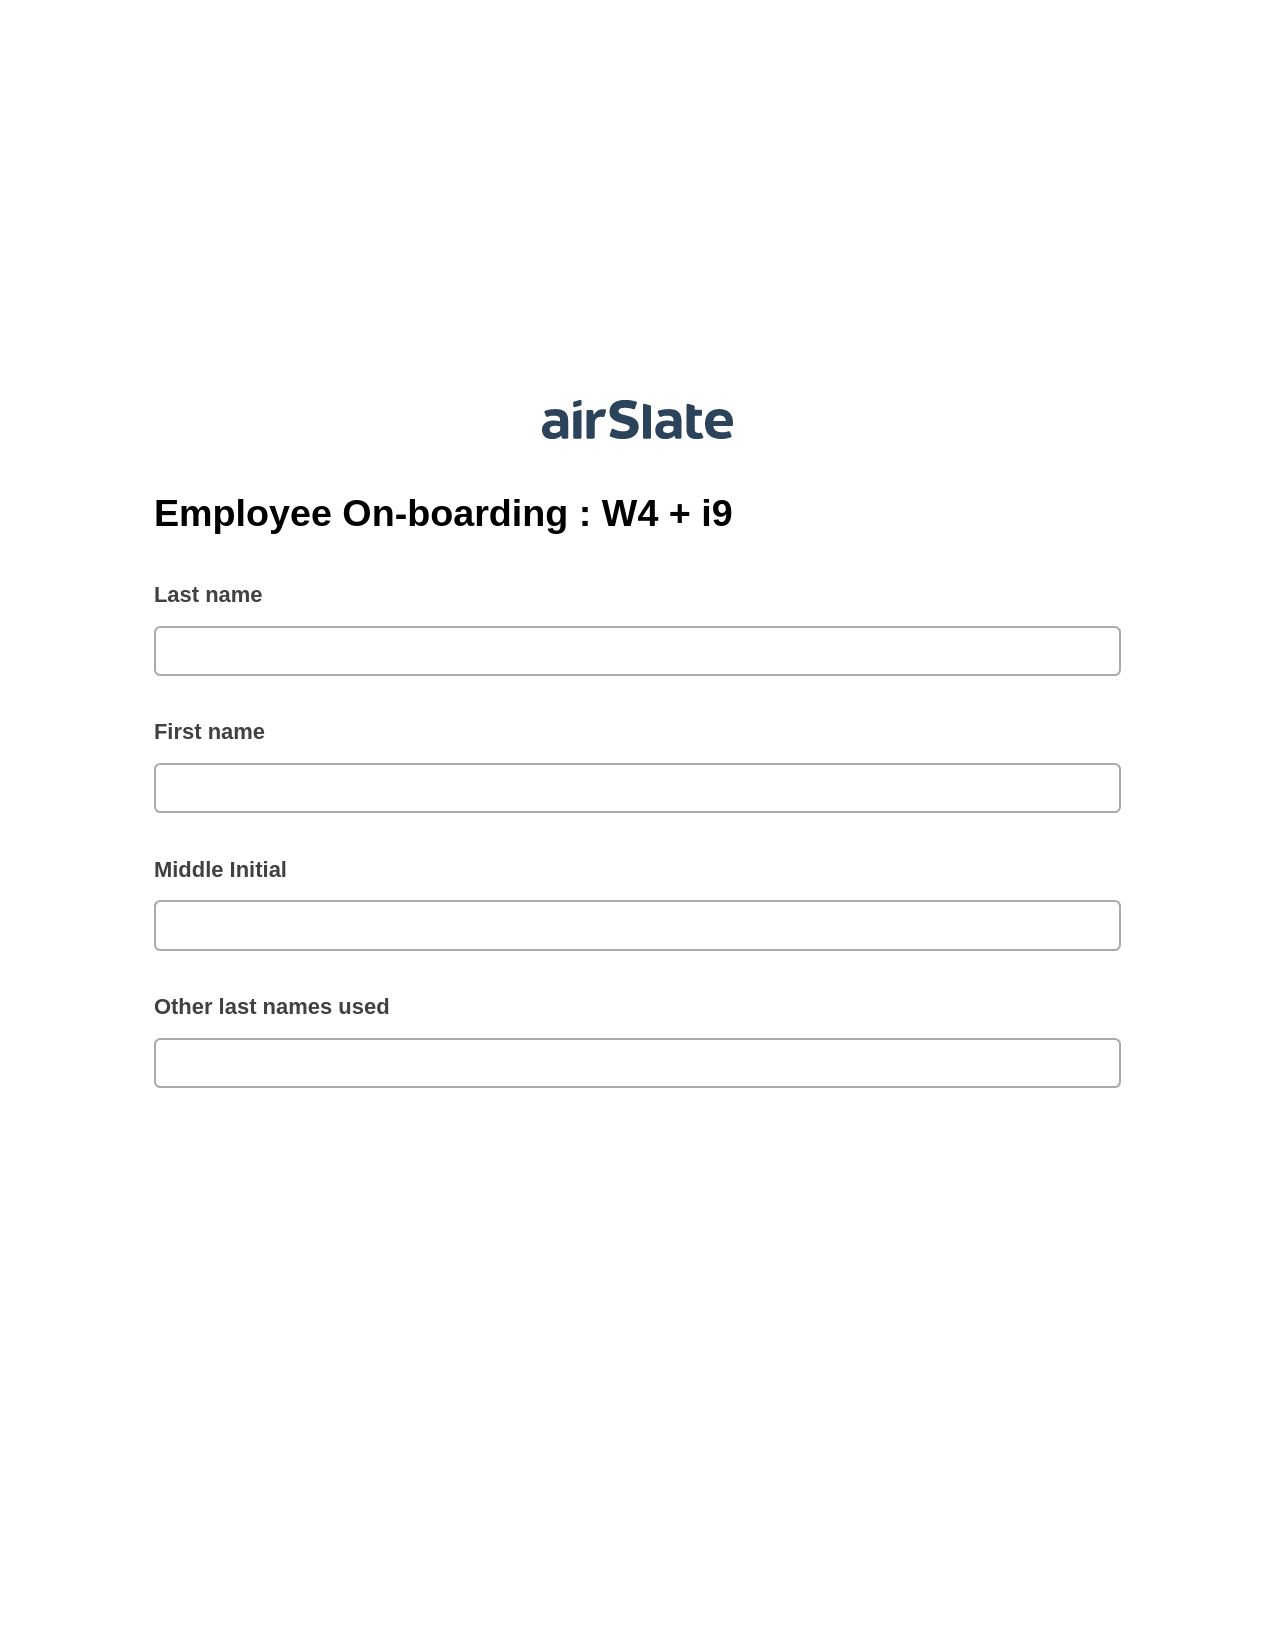 Employee On-boarding : W4 + i9 Pre-fill Dropdowns from CSV File Bot, SendGrid Send Campaign Bot, Export to Excel 365 Bot